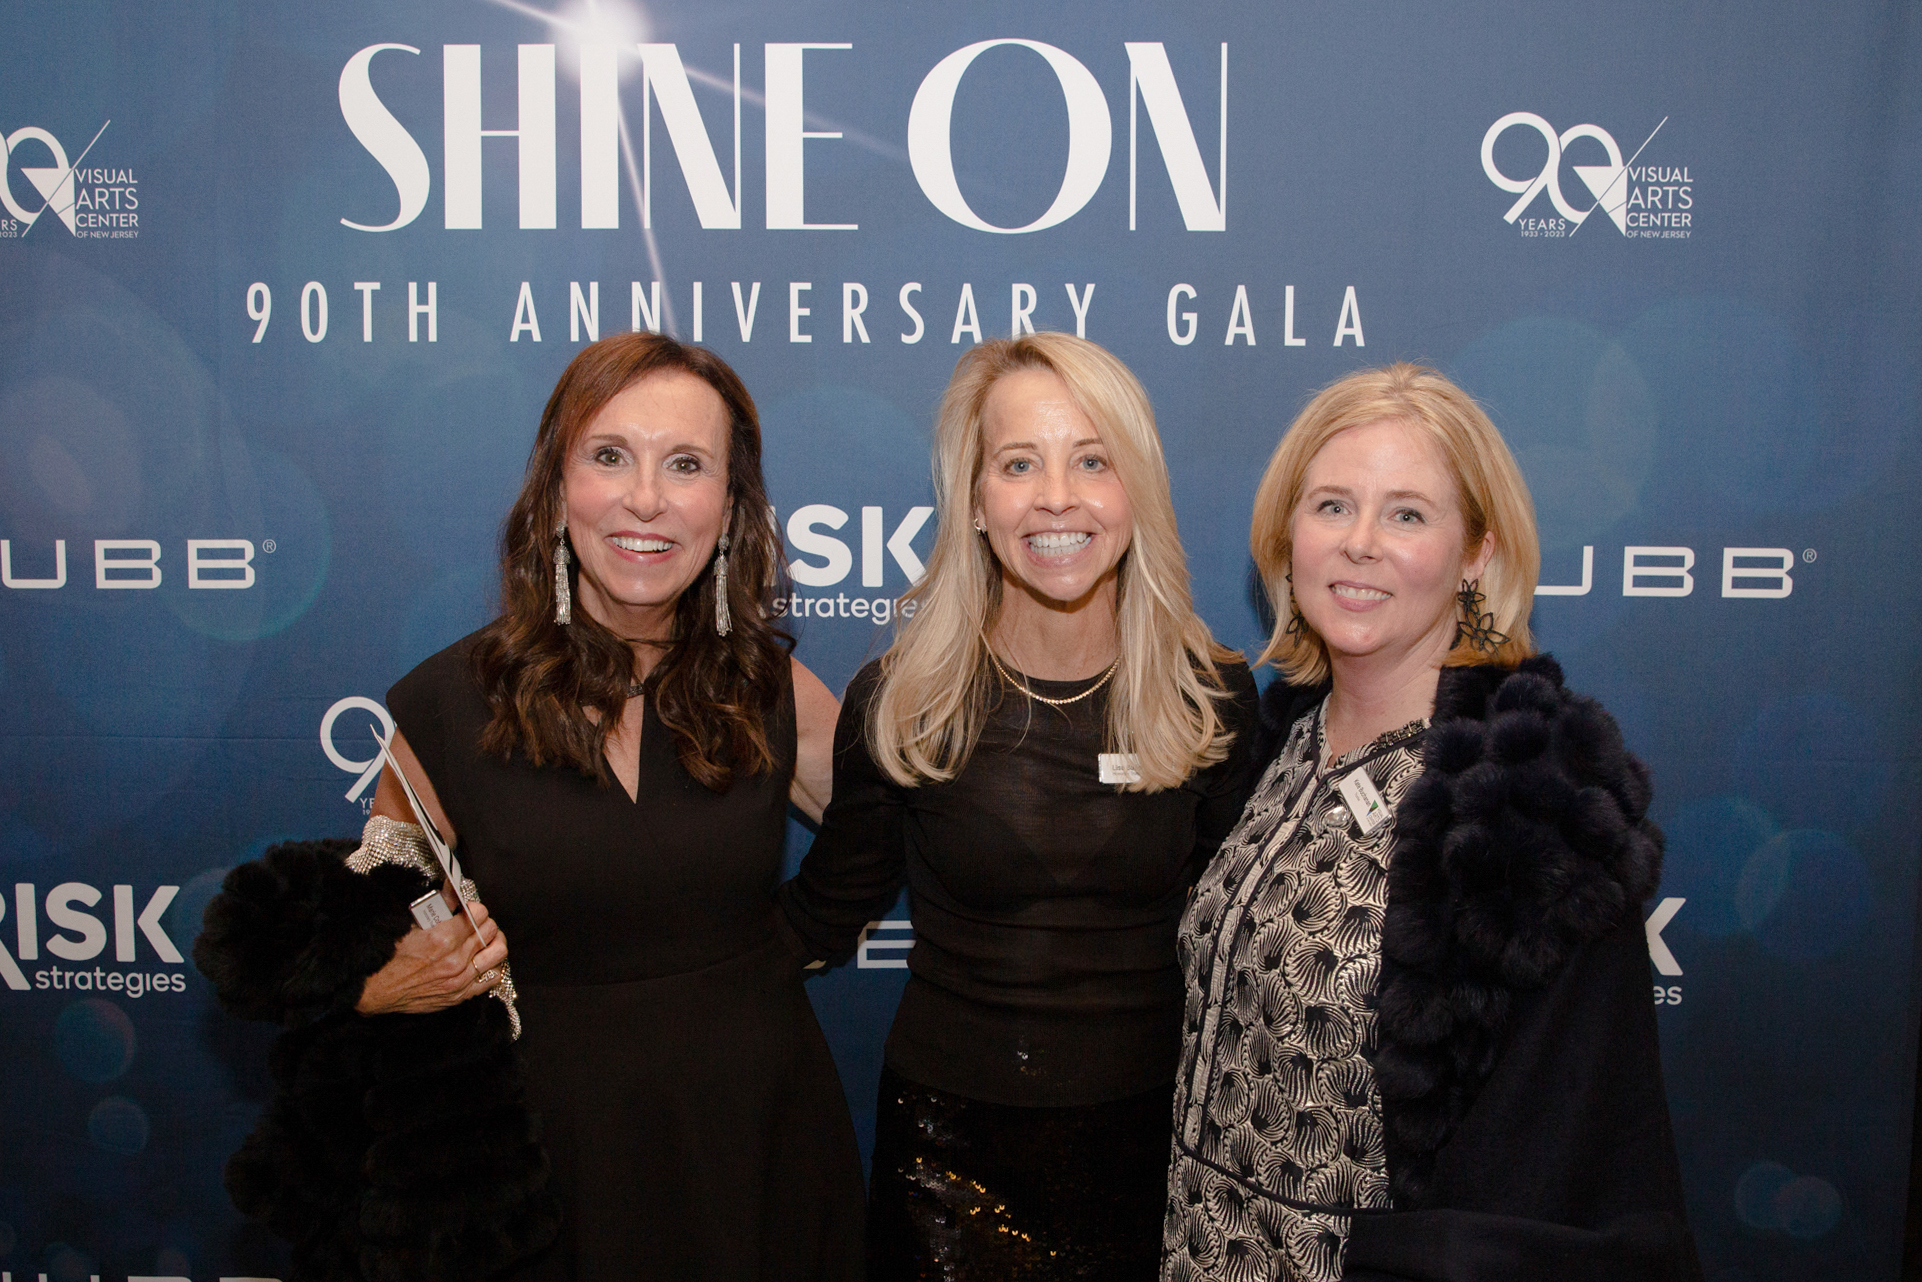 From left to right: Marie Cohen, Lisa Butler, and Kate Buchanan at the VACNJ Annual Gala